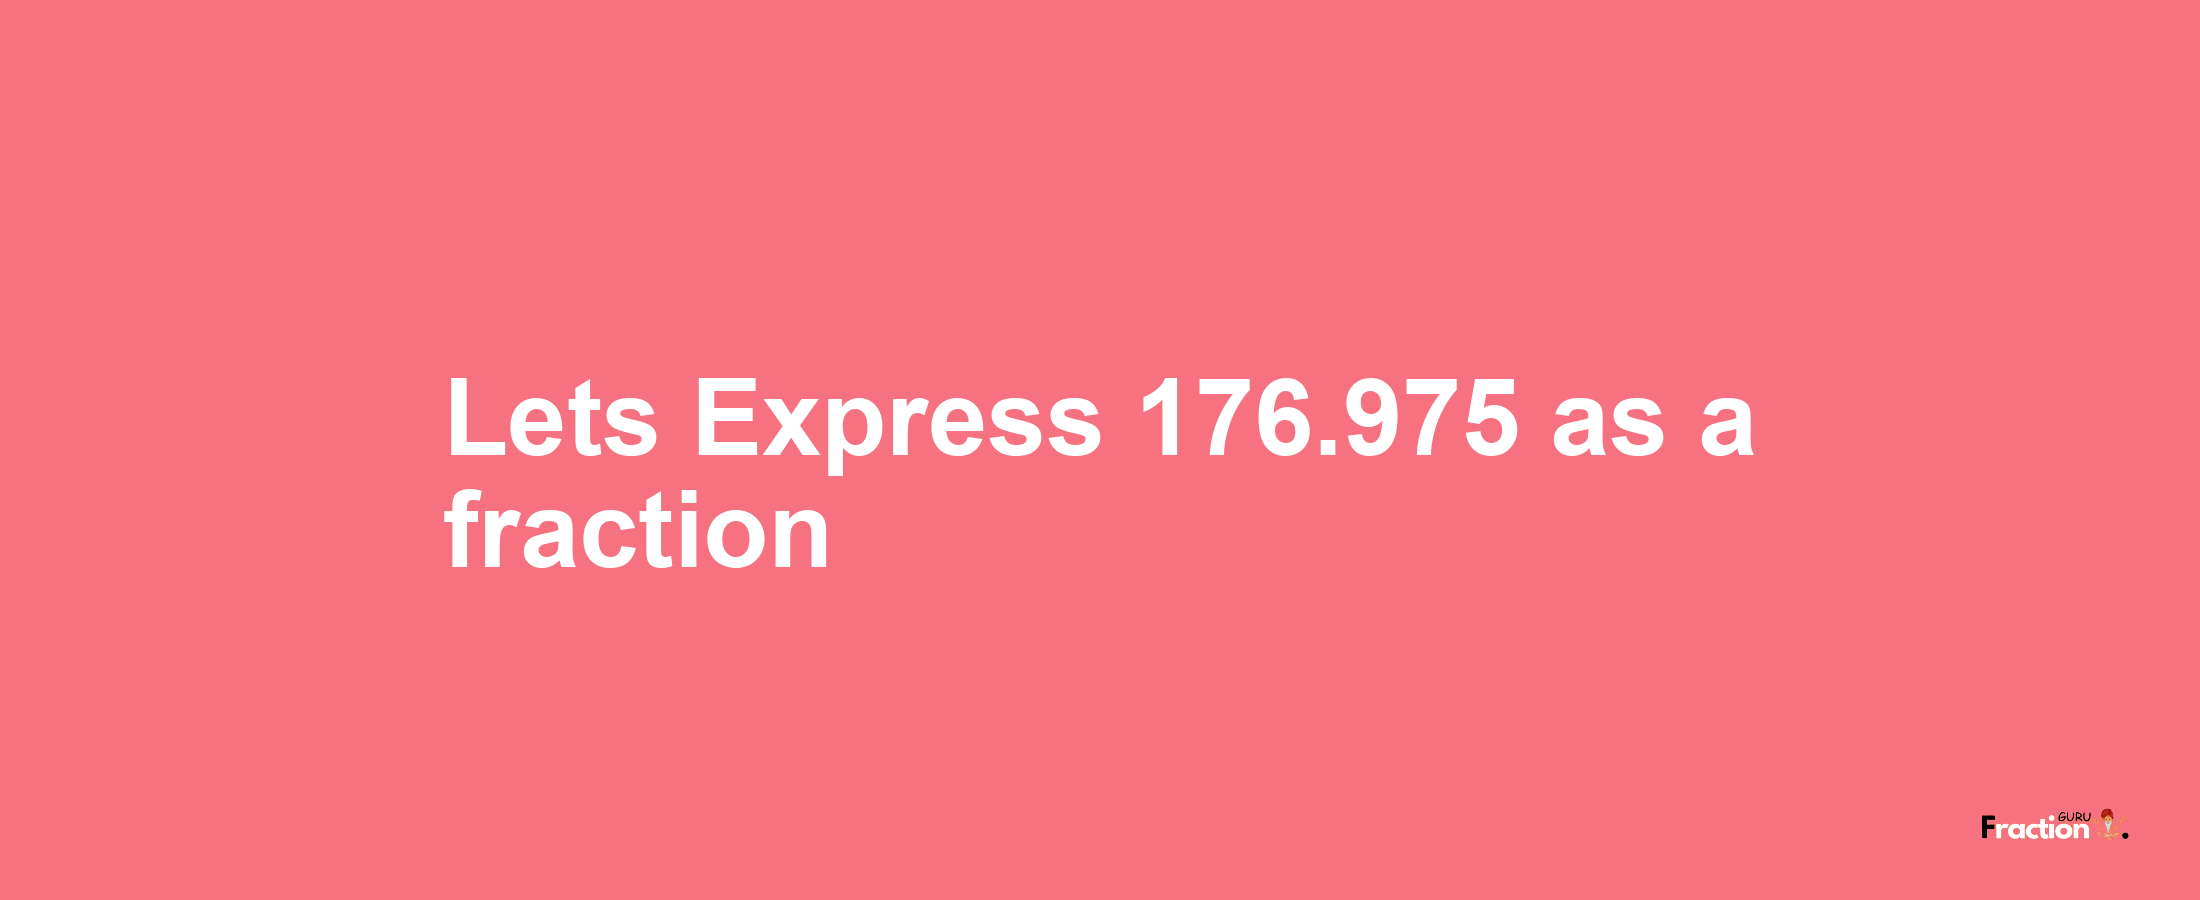 Lets Express 176.975 as afraction